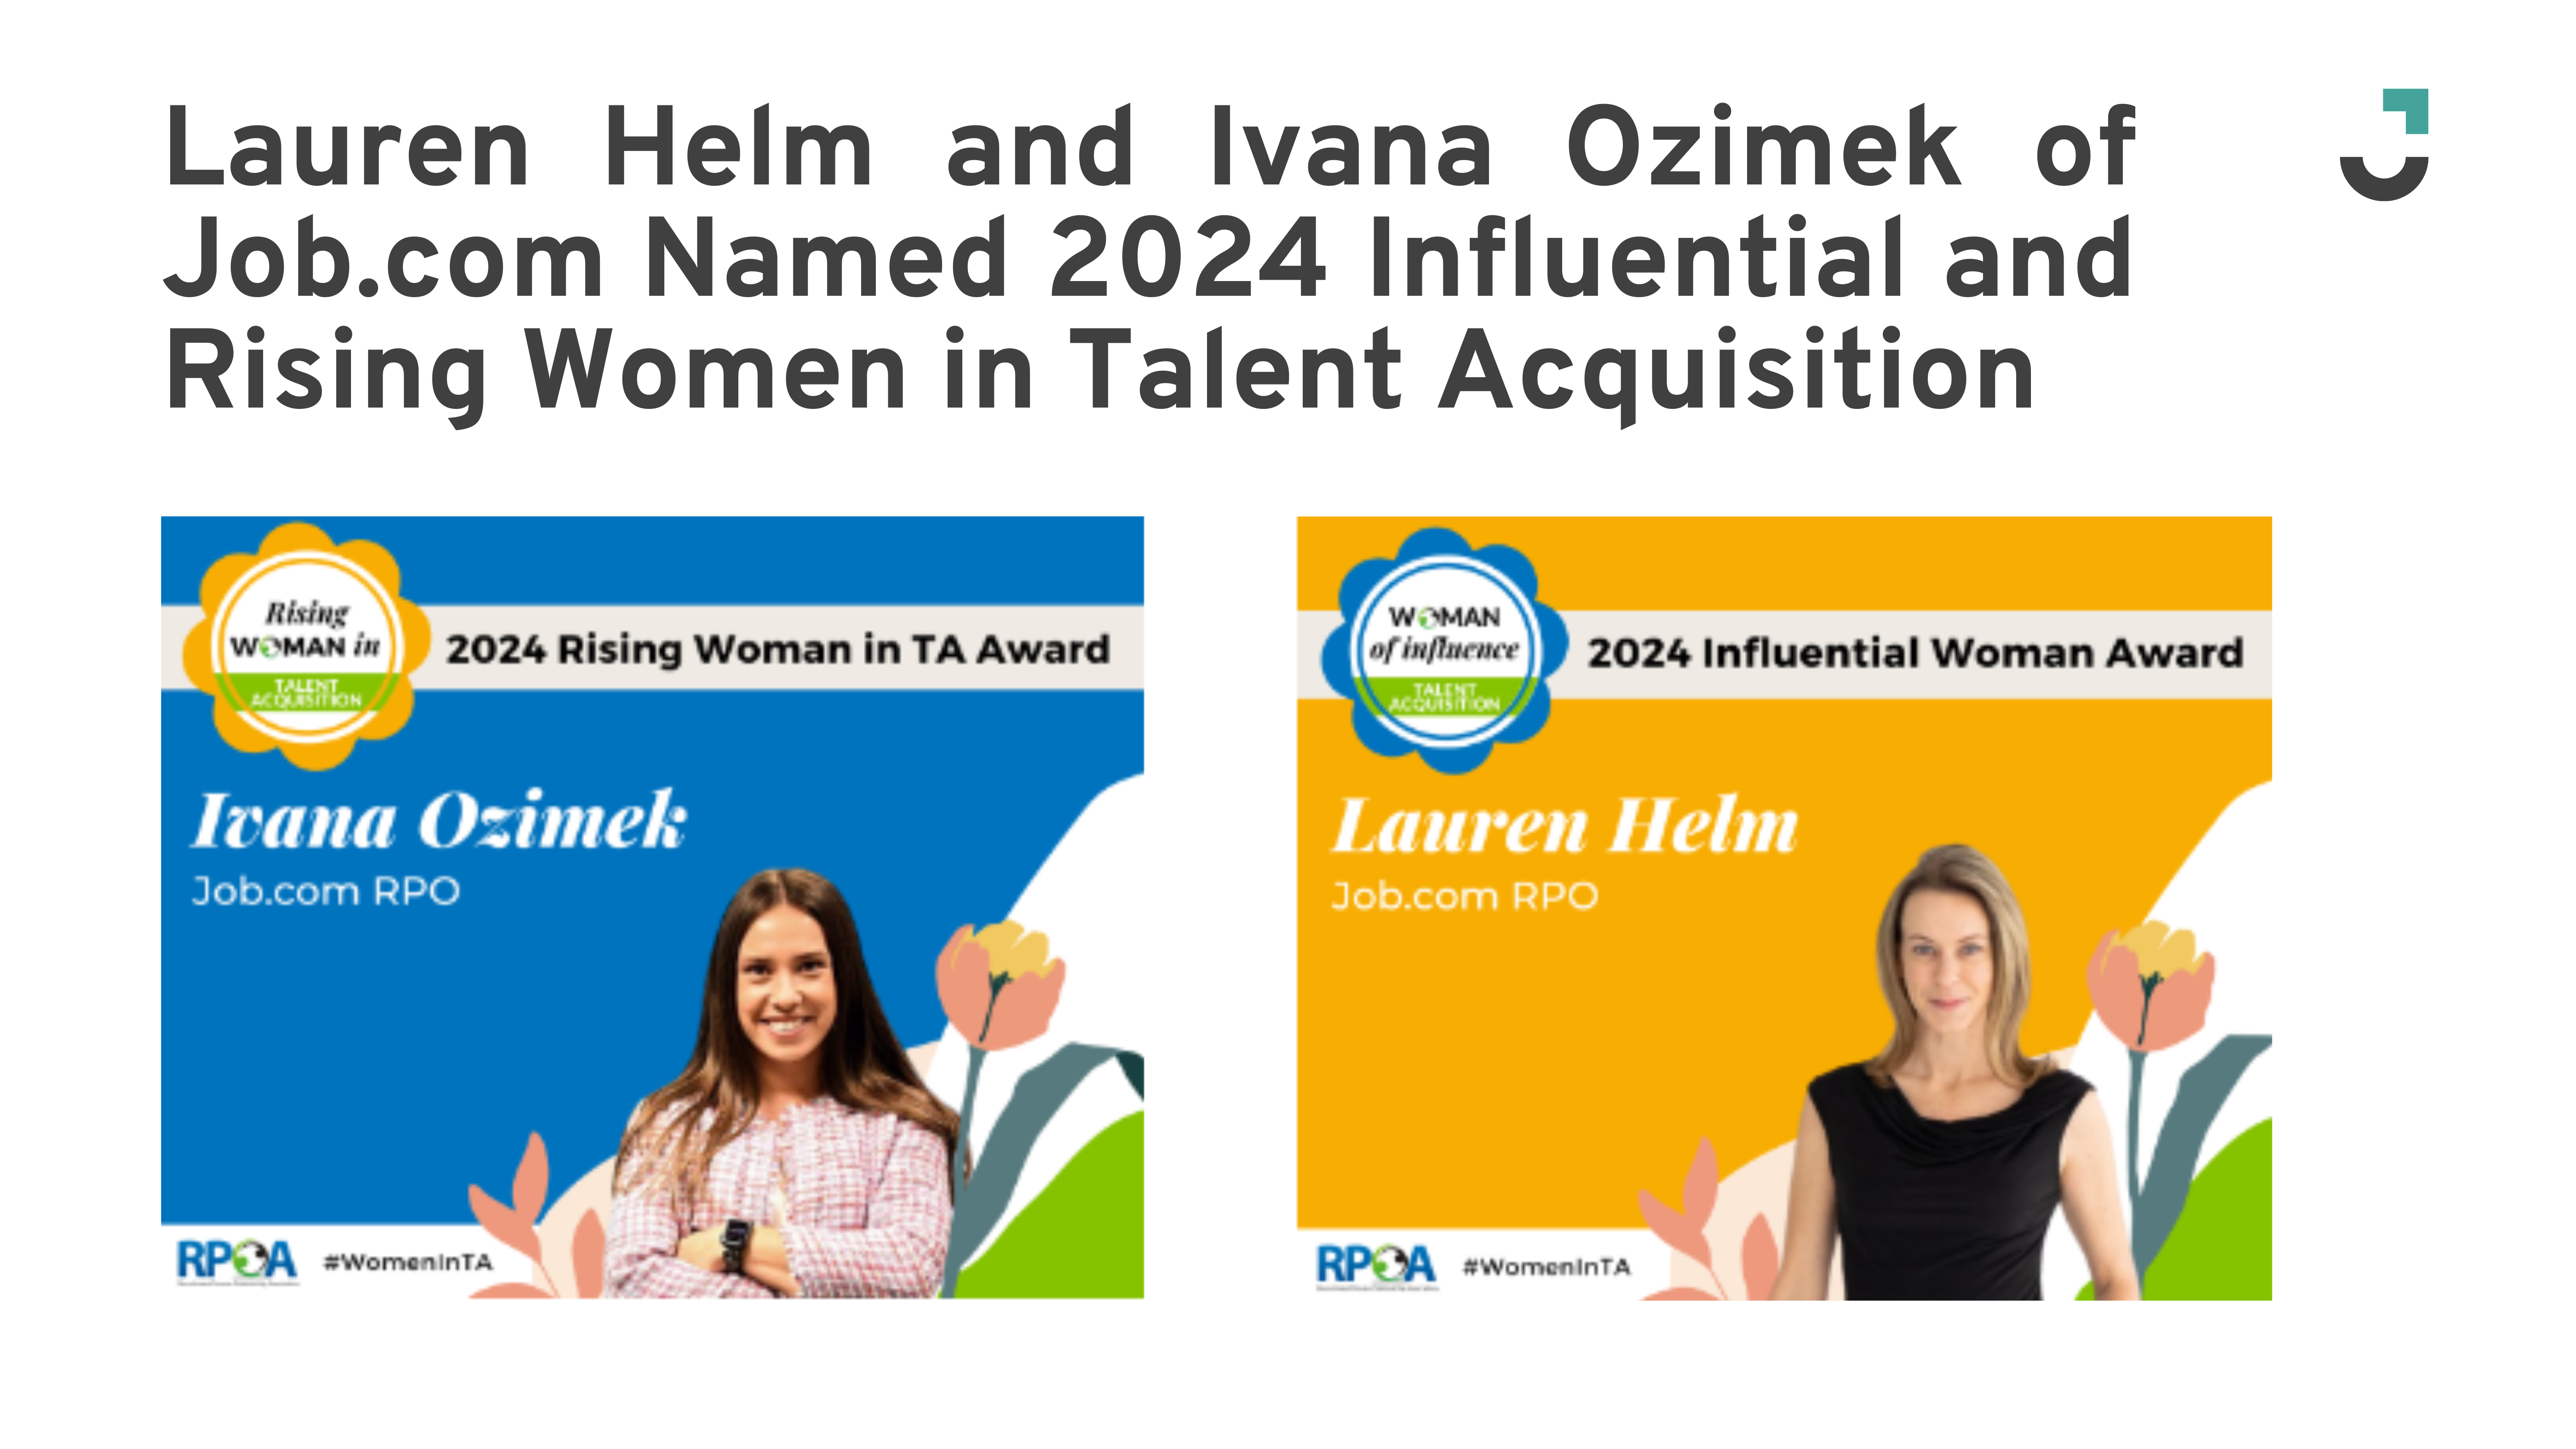 Celebrating Excellence: Lauren Helm and Ivana Ozimek of Job.com Named 2024 Influential and Rising Women in Talent Acquisition